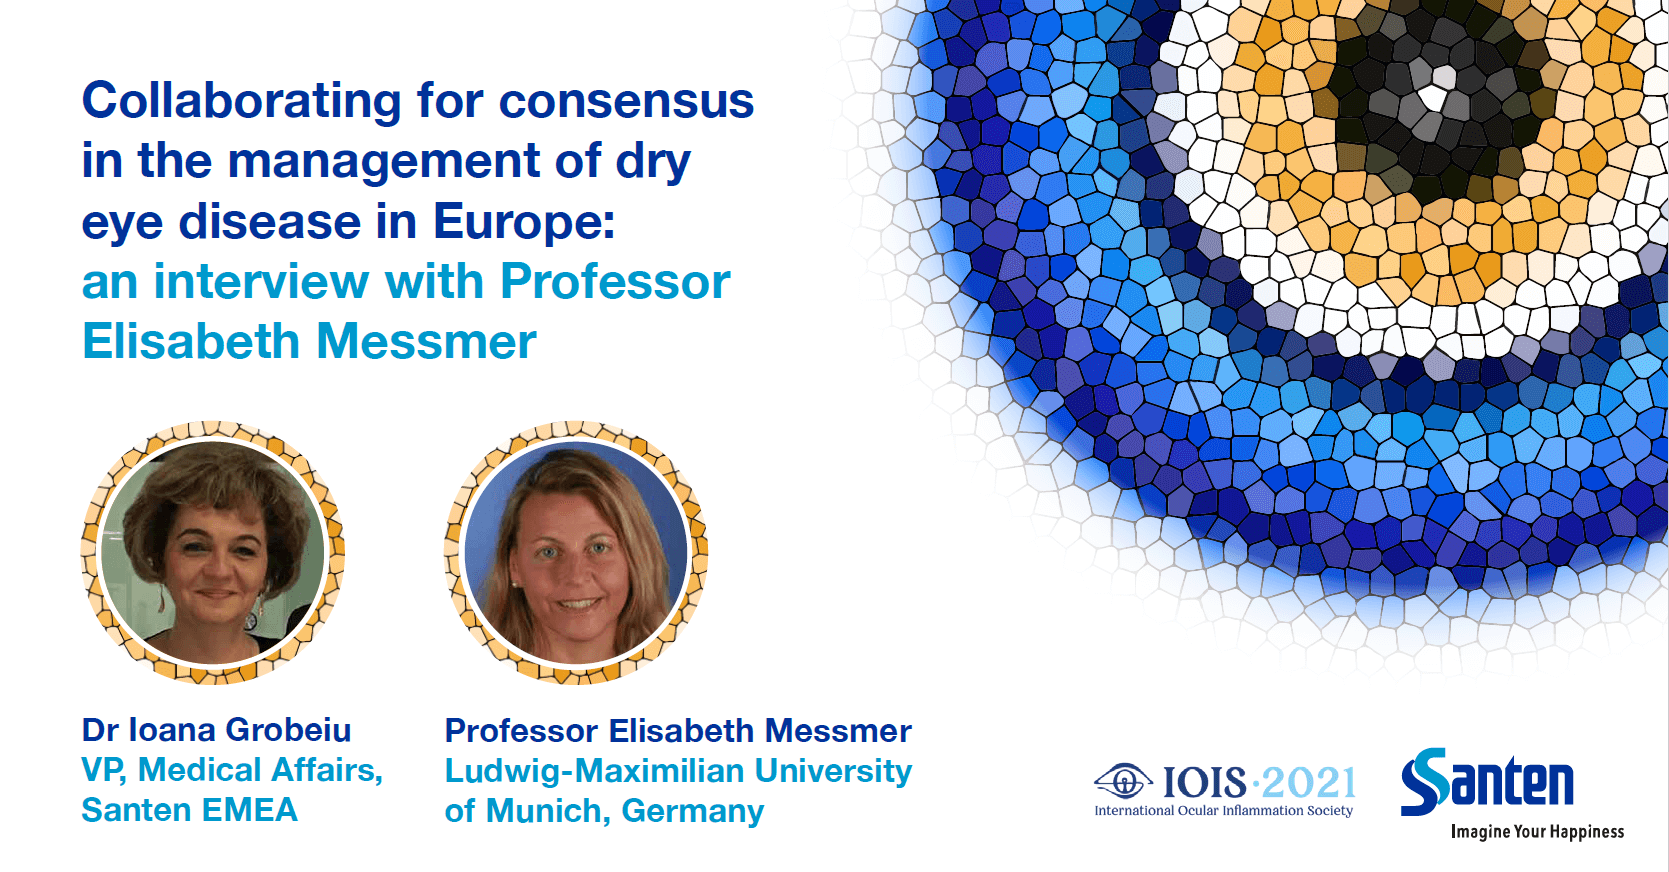 Collaborating for consensus in the management of dry eye disease in Europe: an interview with Professor Elisabeth Messmer